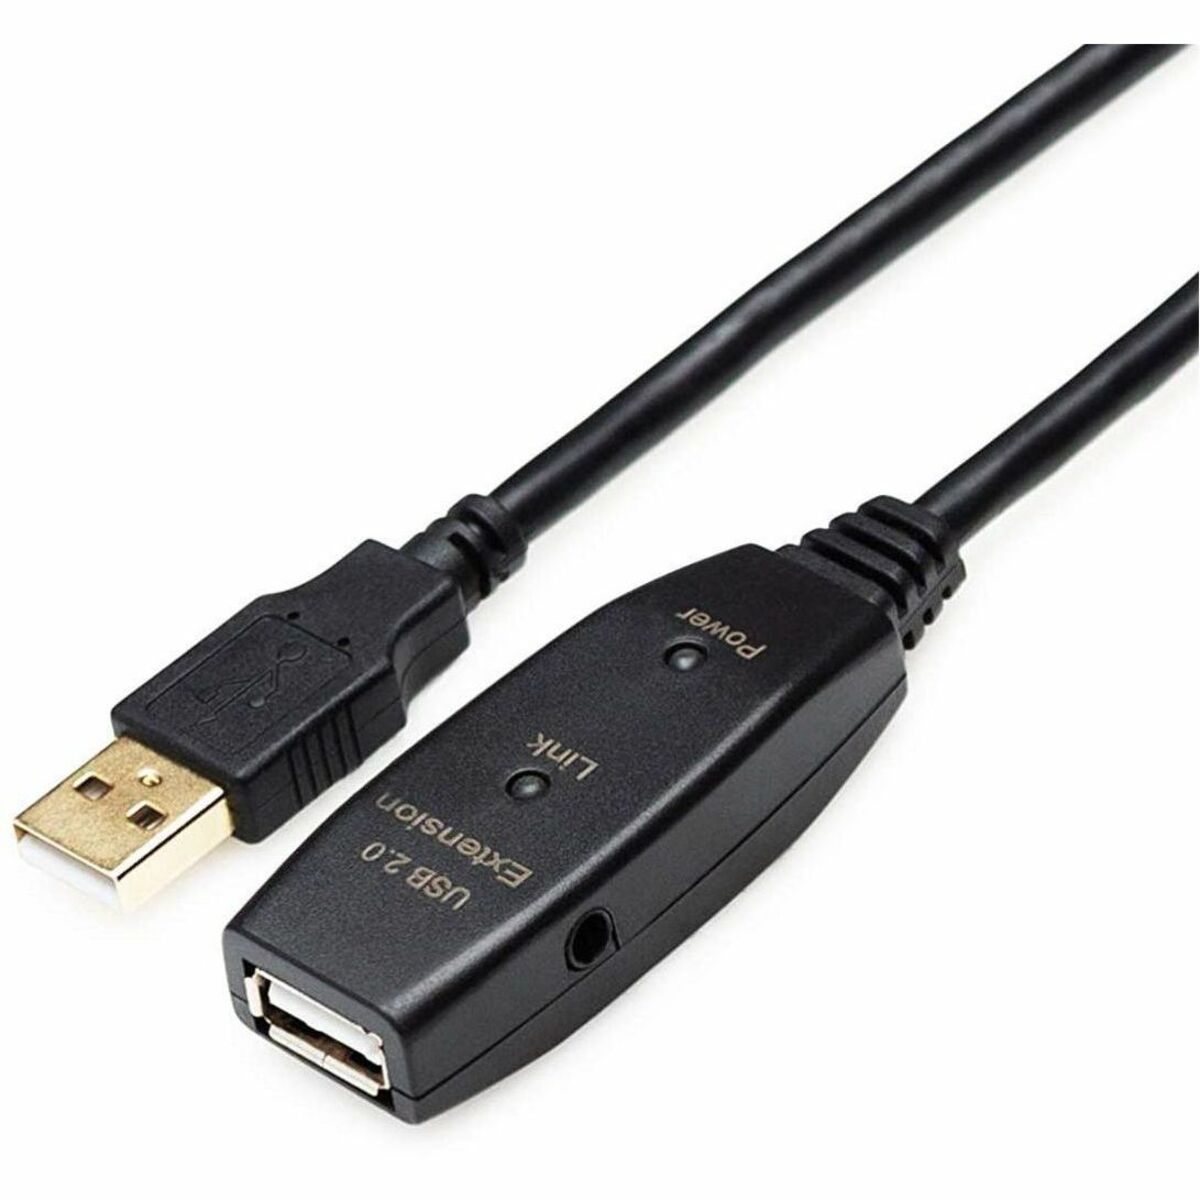 4XEM 4X3202A125M 25M USB 2.0 Active Extension Cable, Plug & Play, Signal Booster, Triple Shielded